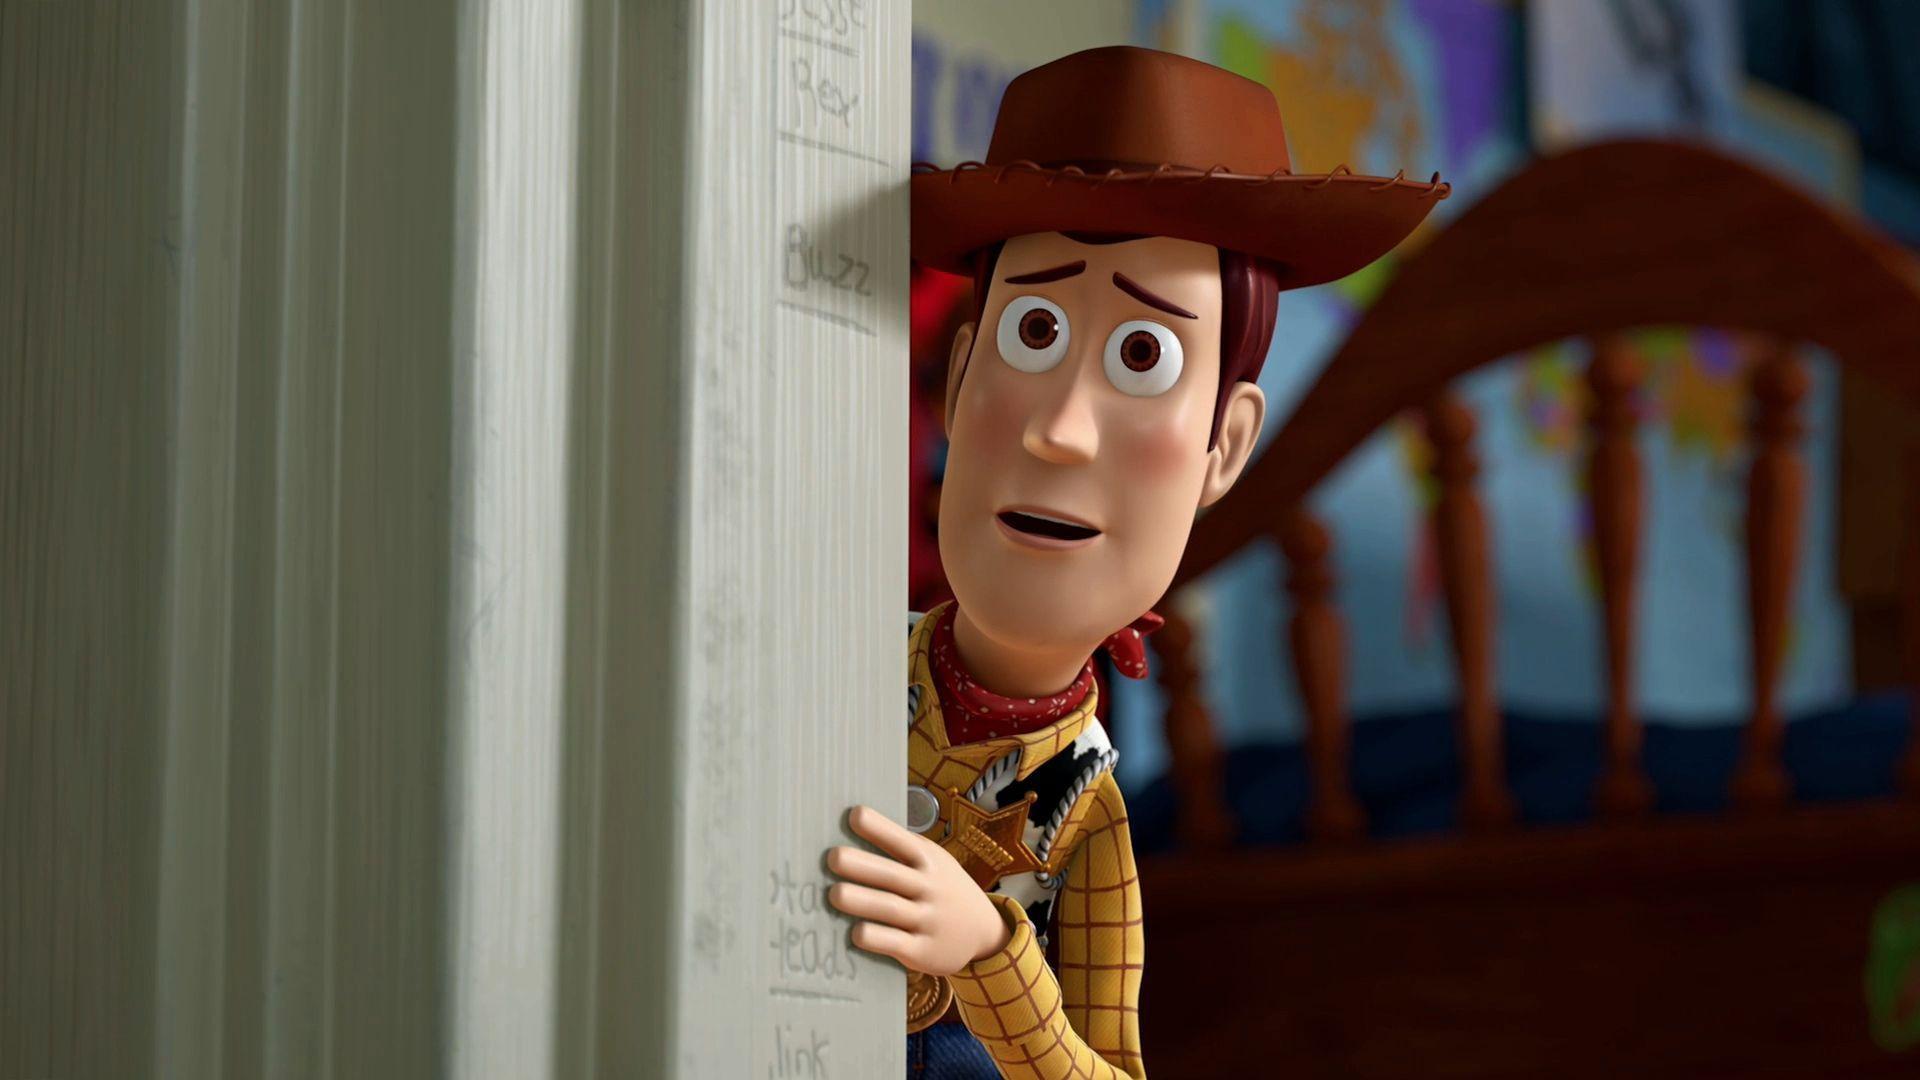 Wallpaper For > Toy Story Wallpaper Woody